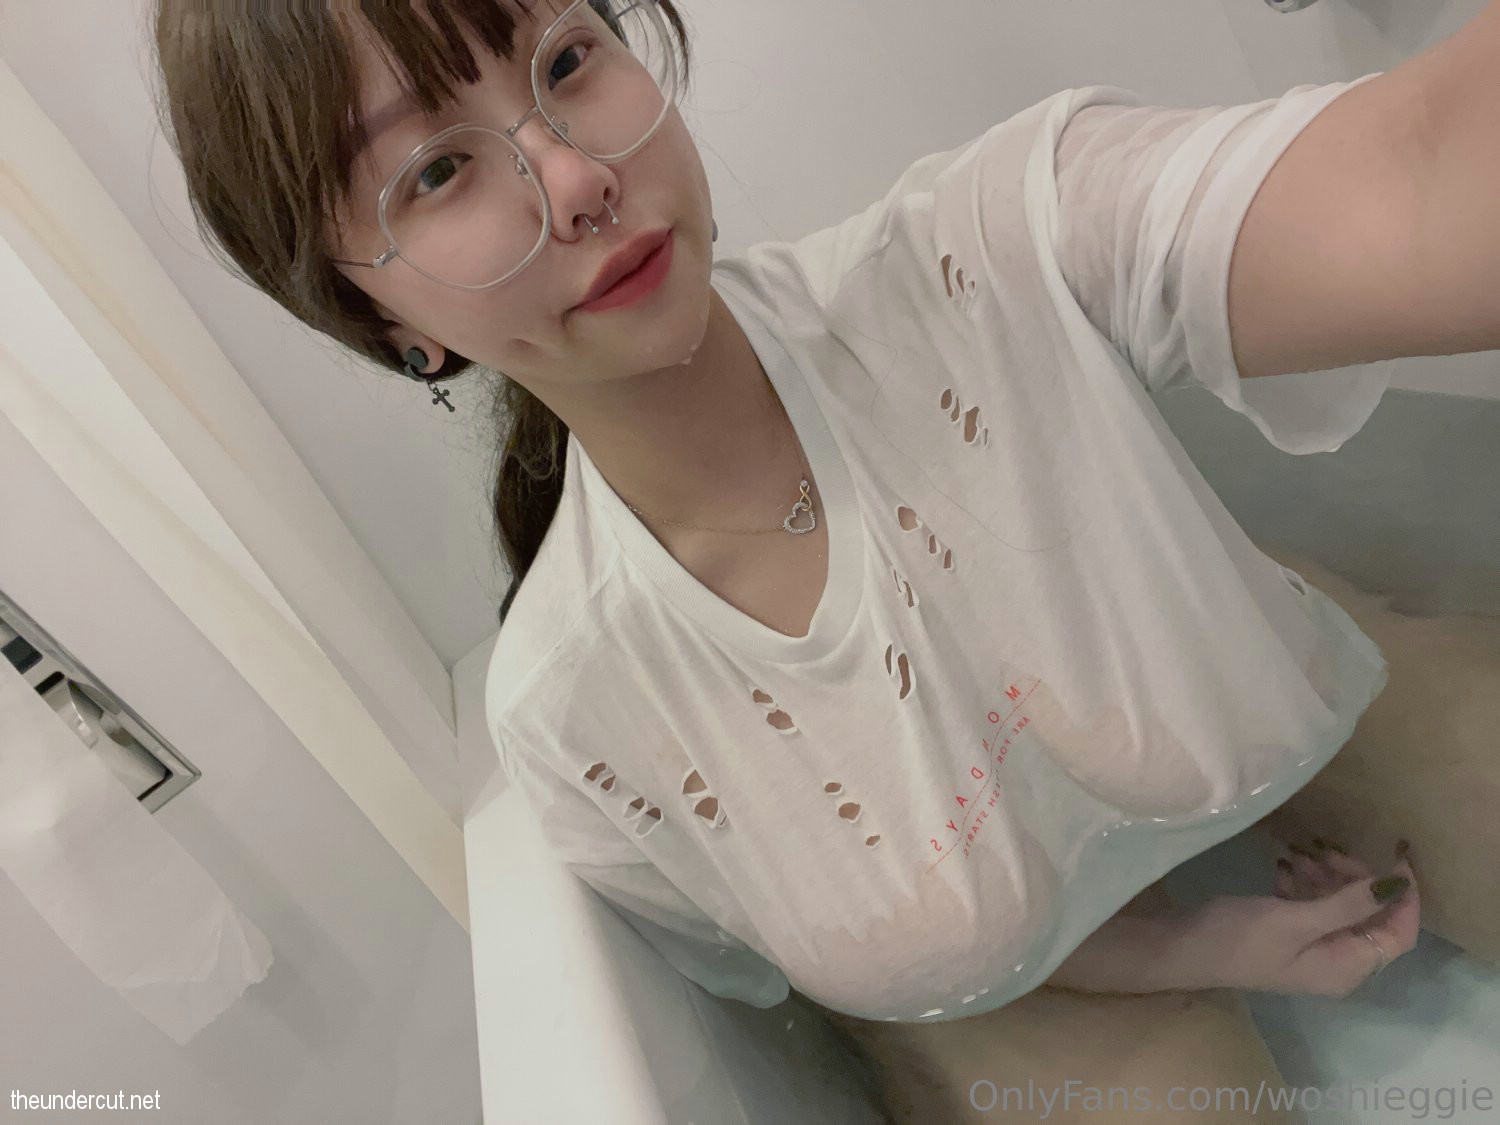 Eggies Onlyfans Woshieggie Nude Leaked 032